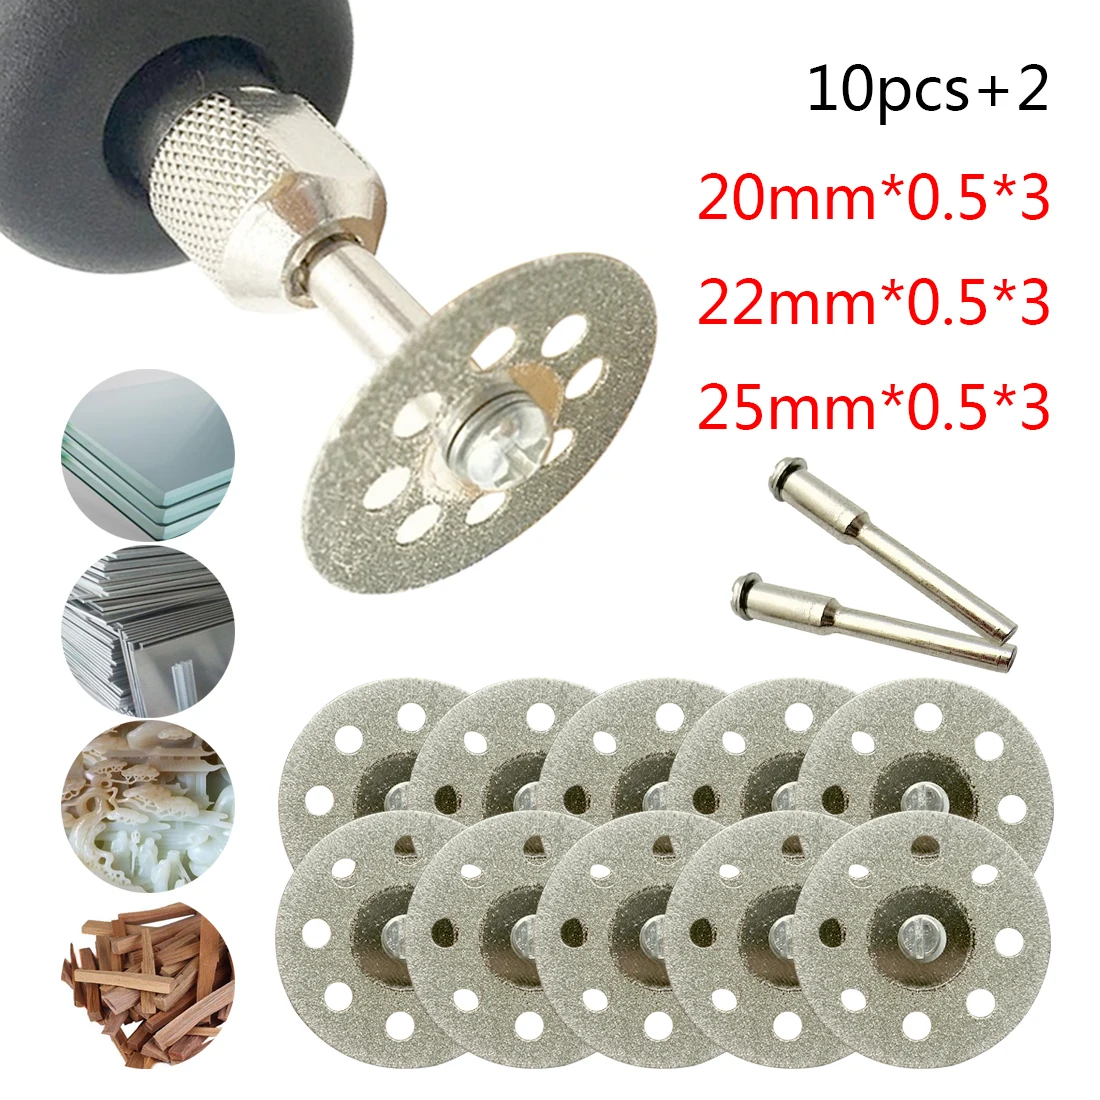 

5pcs/10pcs Diamond Saw Cutting Disks For Dremel with Mandrel Rotary Tools Accessories Mini Grinding Wheel Abrasive Disc